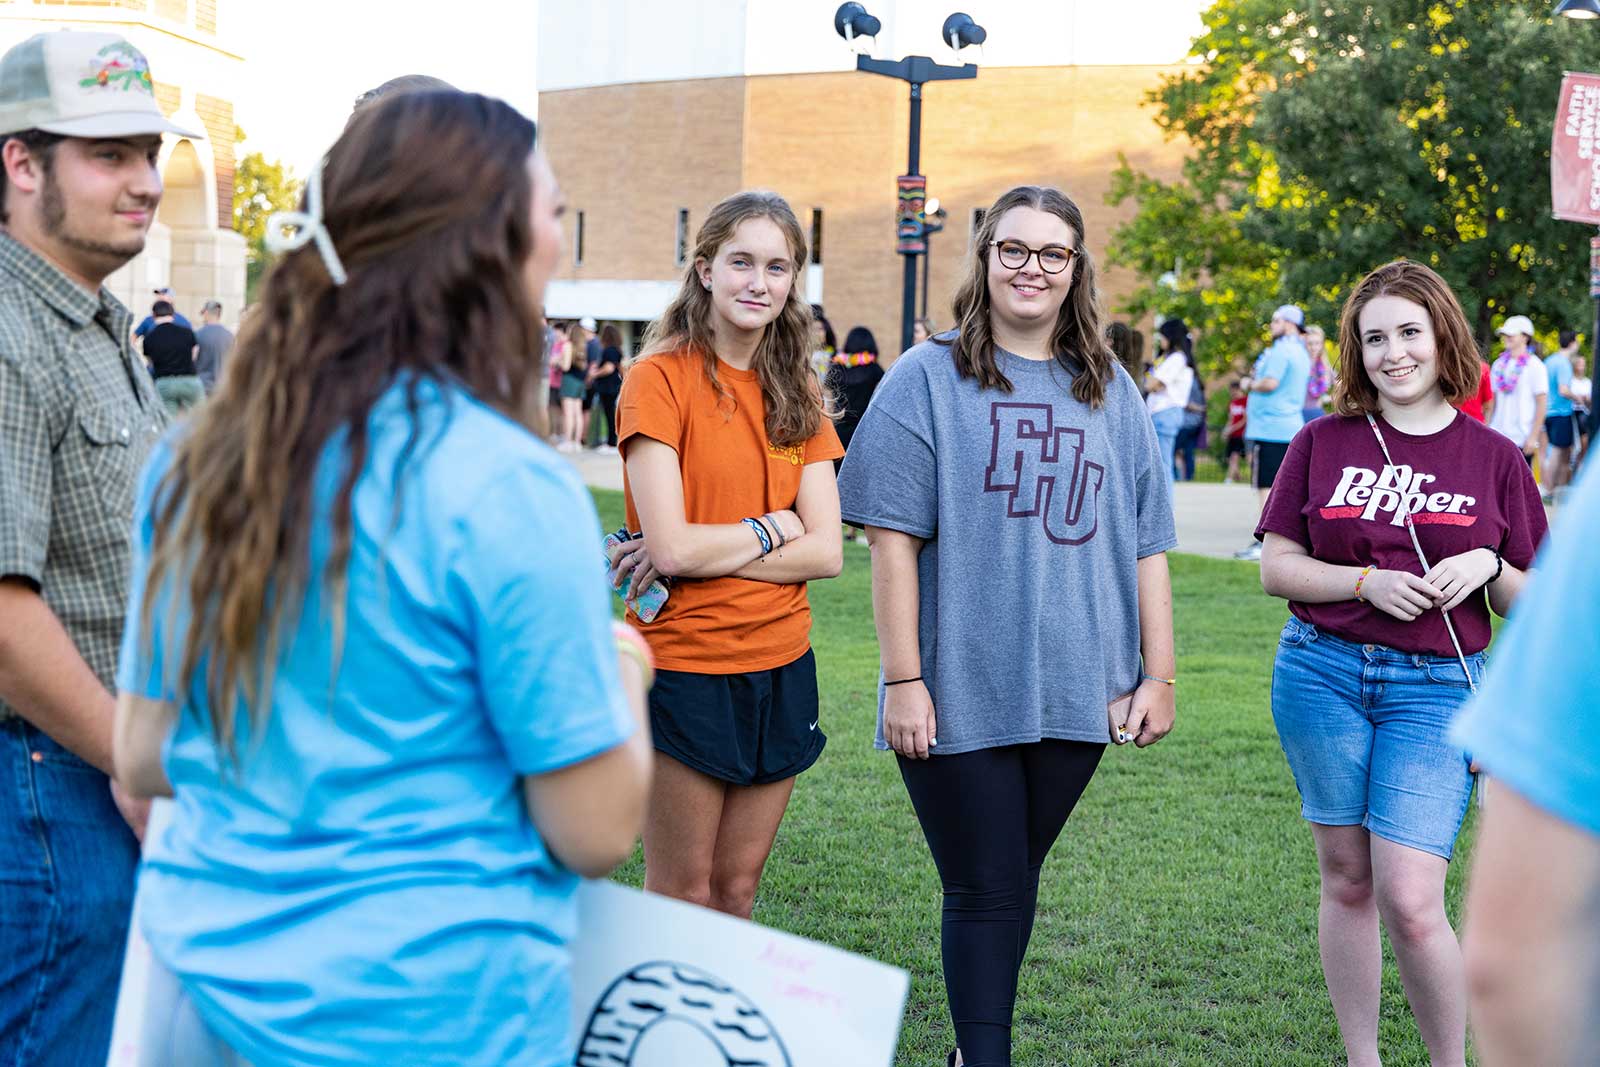 FHU Promise strives to help students and families with limited resources afford quality education with reduced payments and financial aid services.